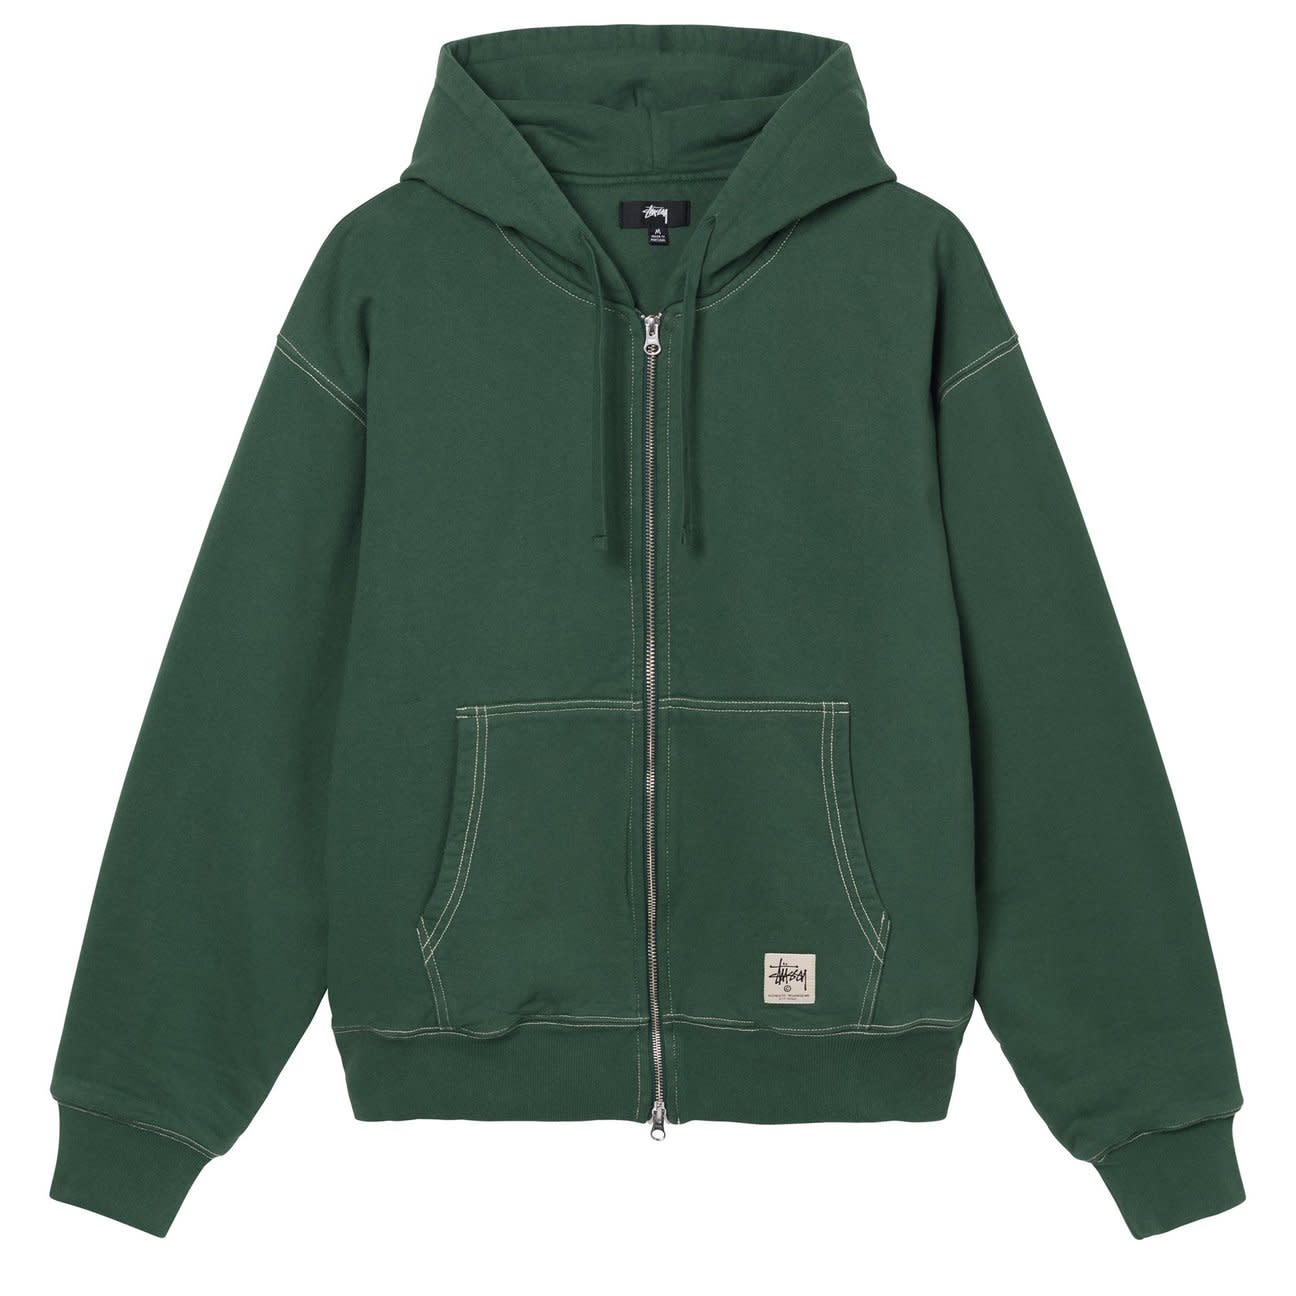 STUSSY DOUBLE FACE LABEL ZIP HOODIE XL - パーカー